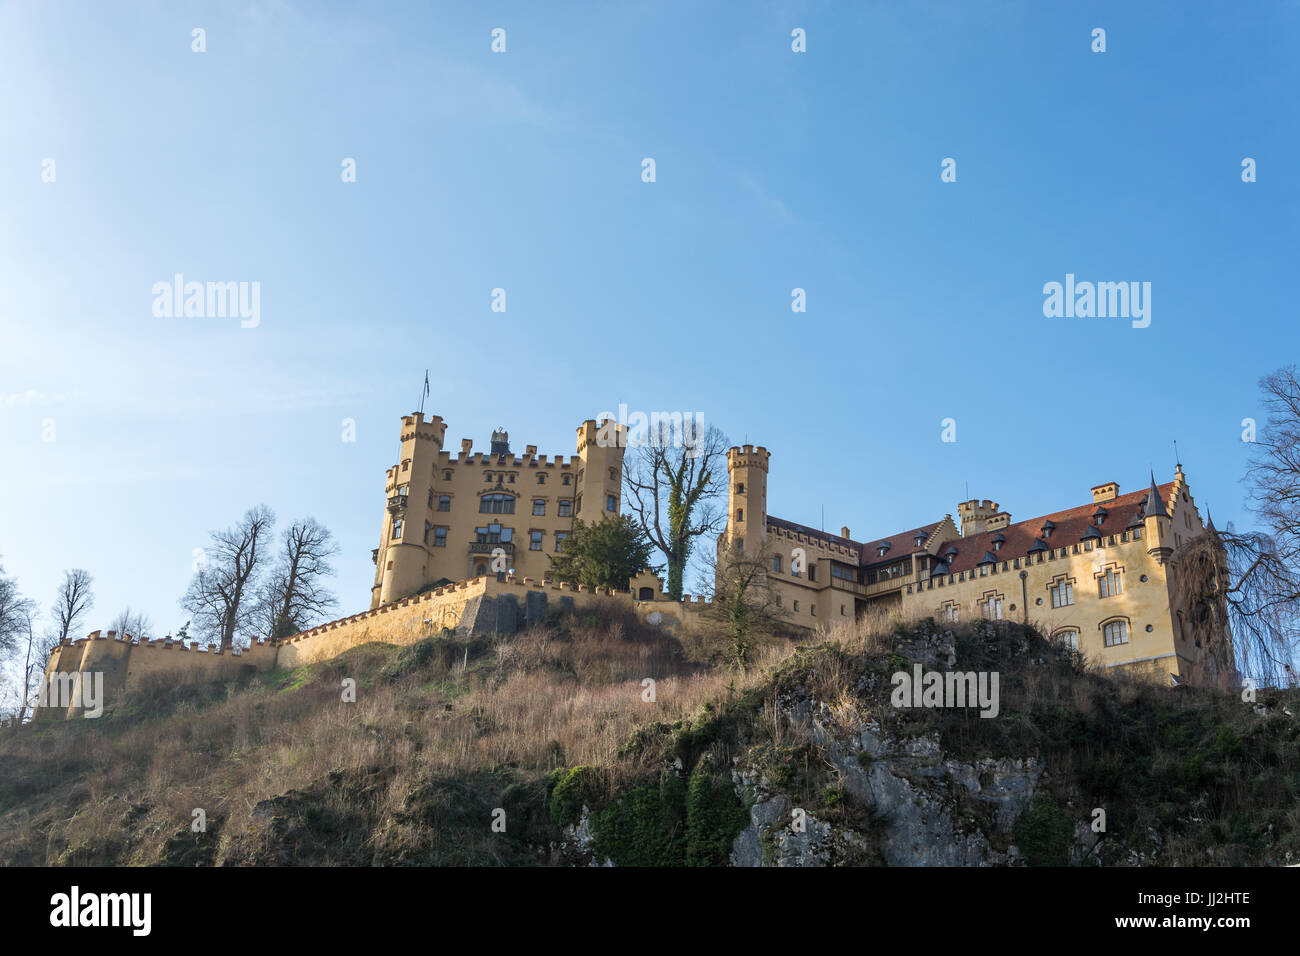 The castle Hohenschwangau on a hill in the sunny afternoon Stock Photo